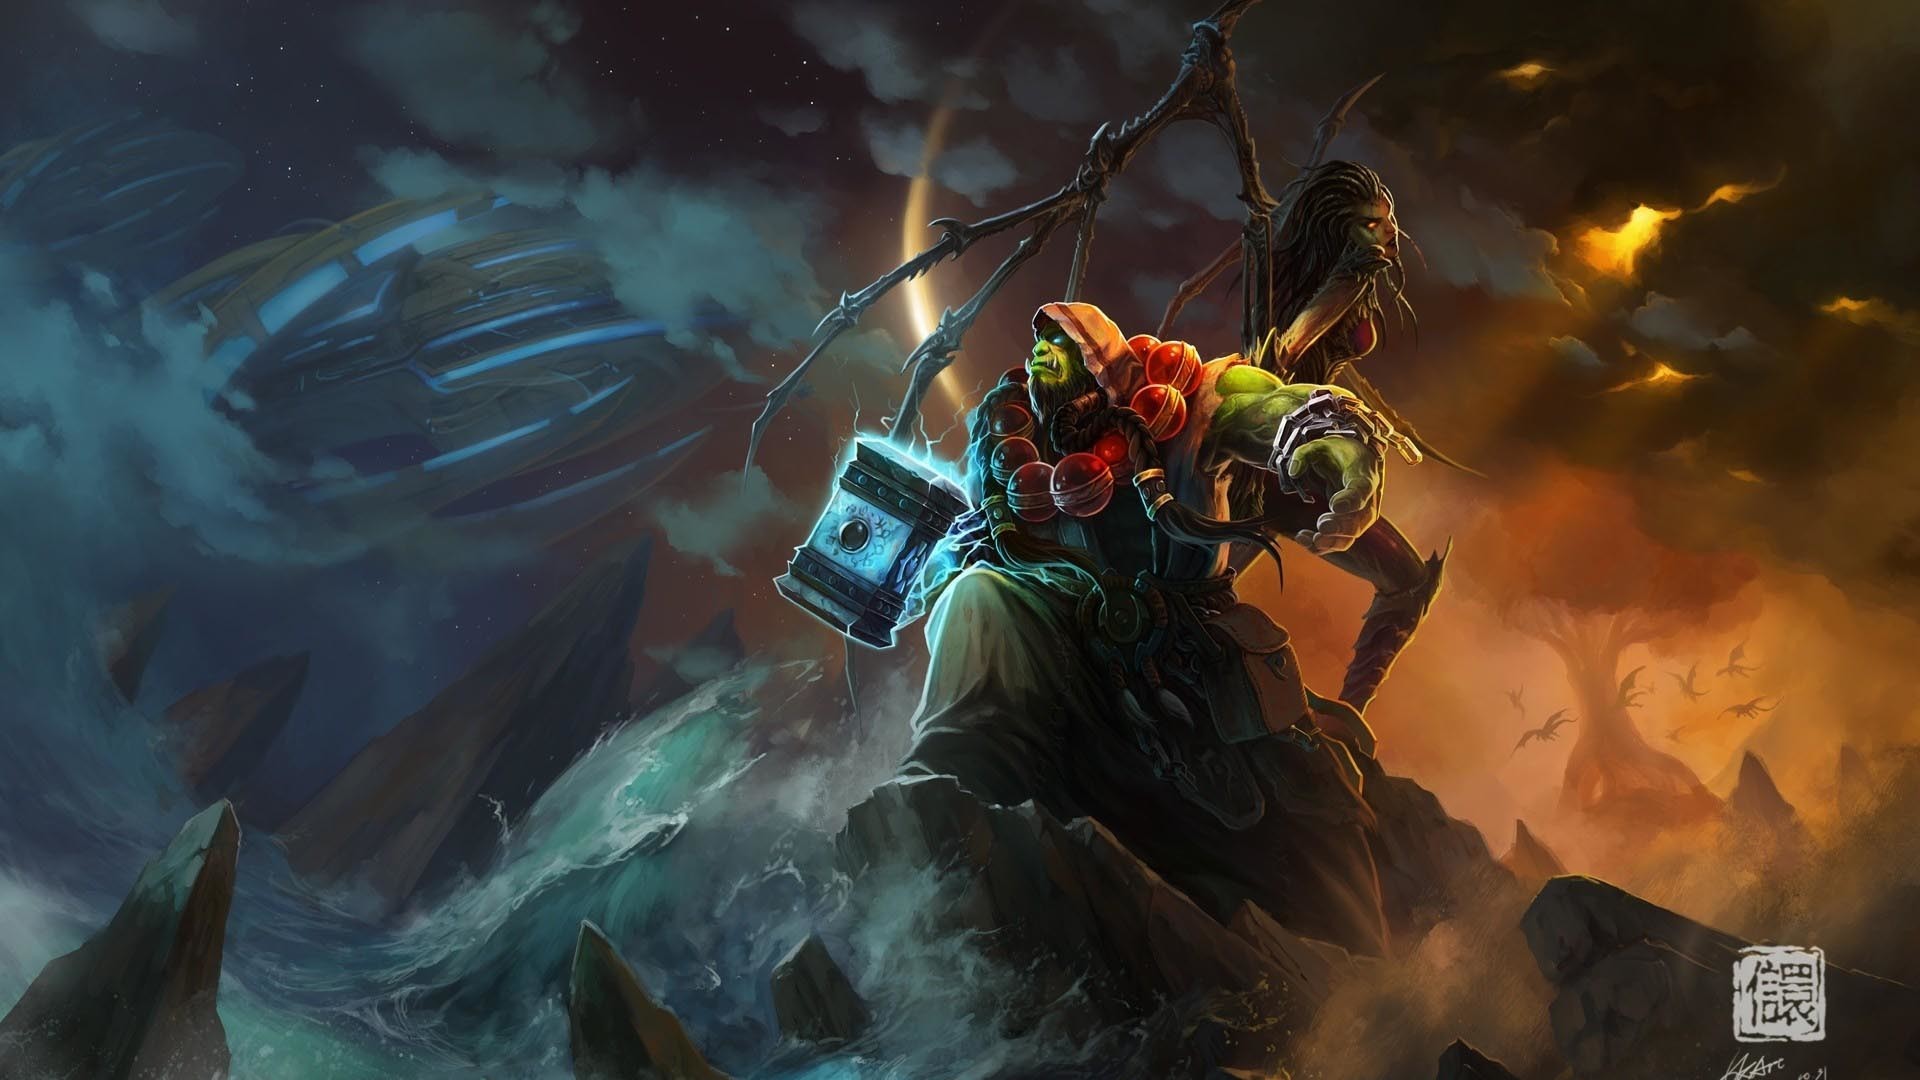 1920x1080 World of Warcraft Ocean Shaman Wallpaper - 1920 x Really nice World of  Warcraft wallpaper featuring a couple of characters readying themselves for  battle.